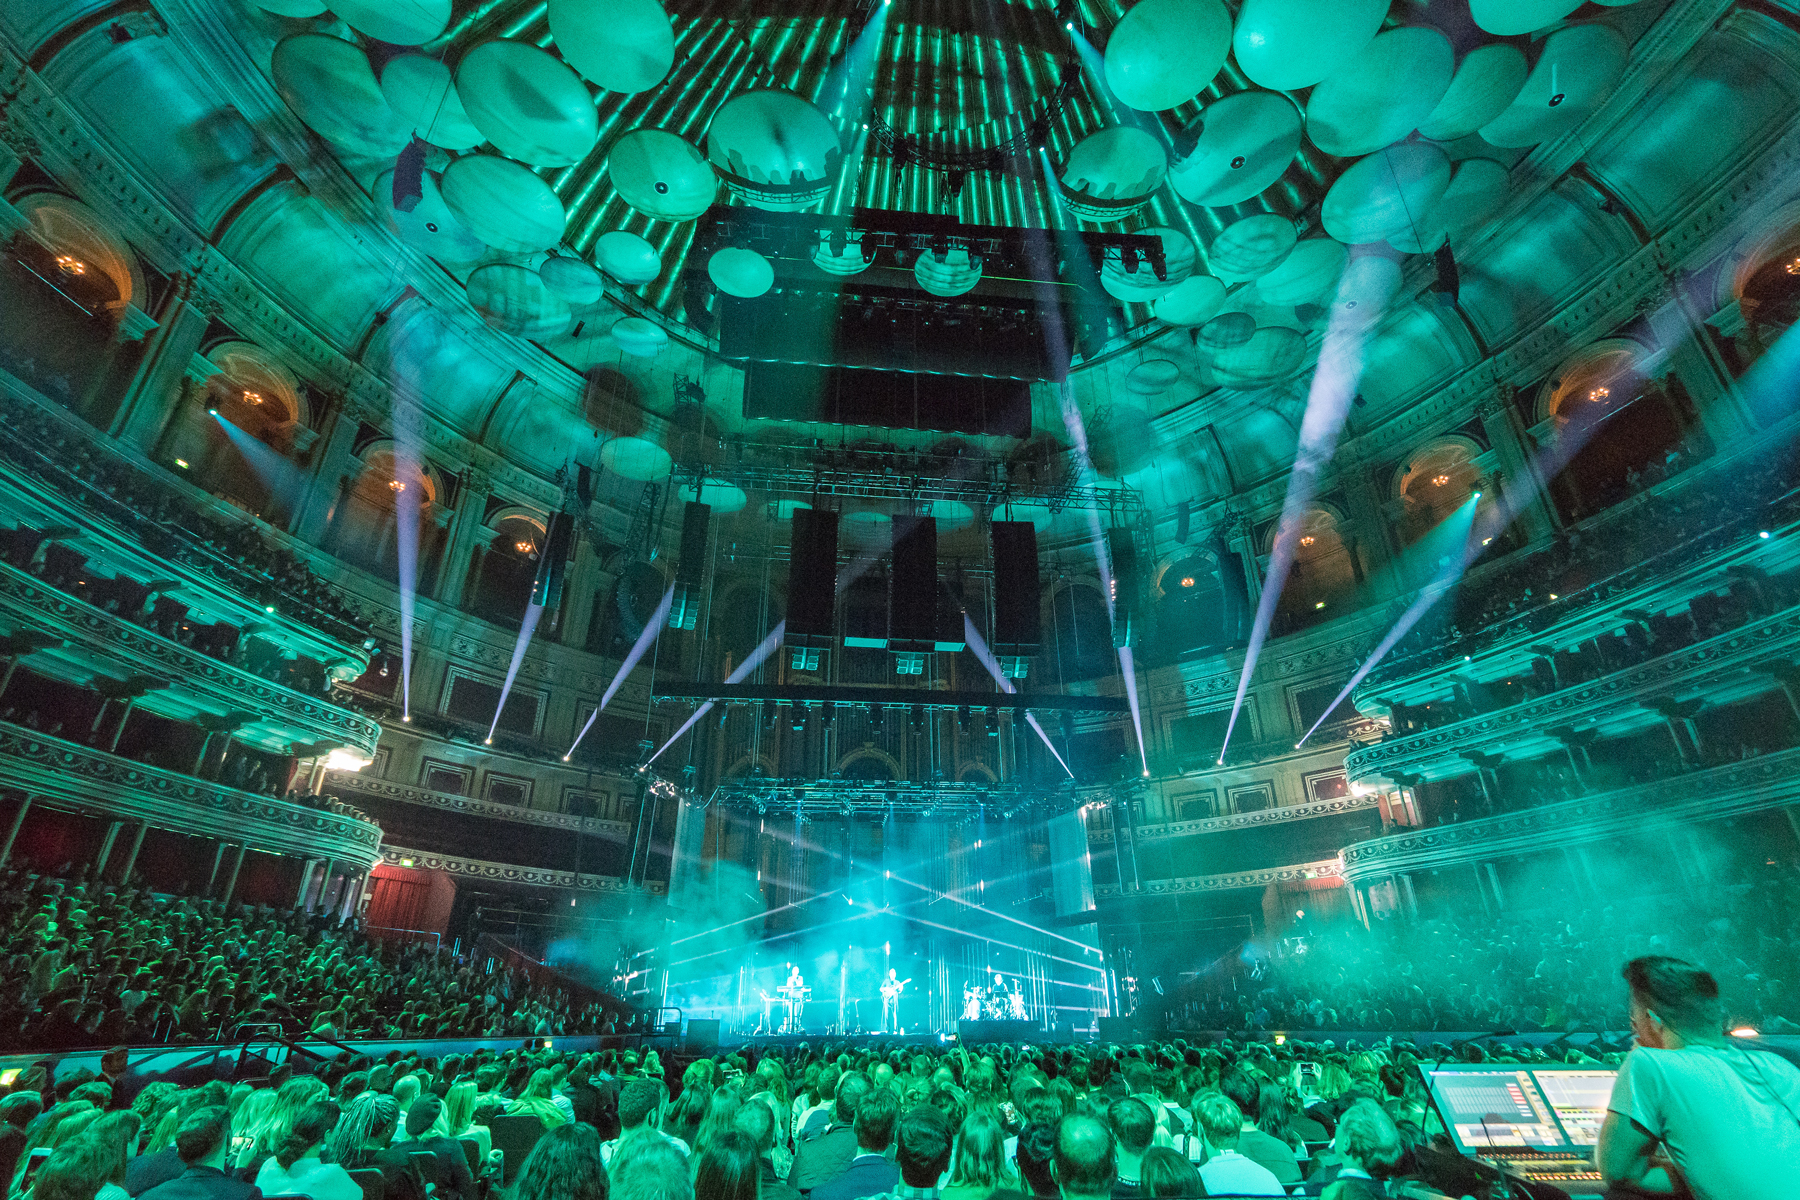 UK’s first deployment of L-ISA Immersive Hyperreal Sound delivers dazzling experience for alt-J fans at the Royal Albert Hall